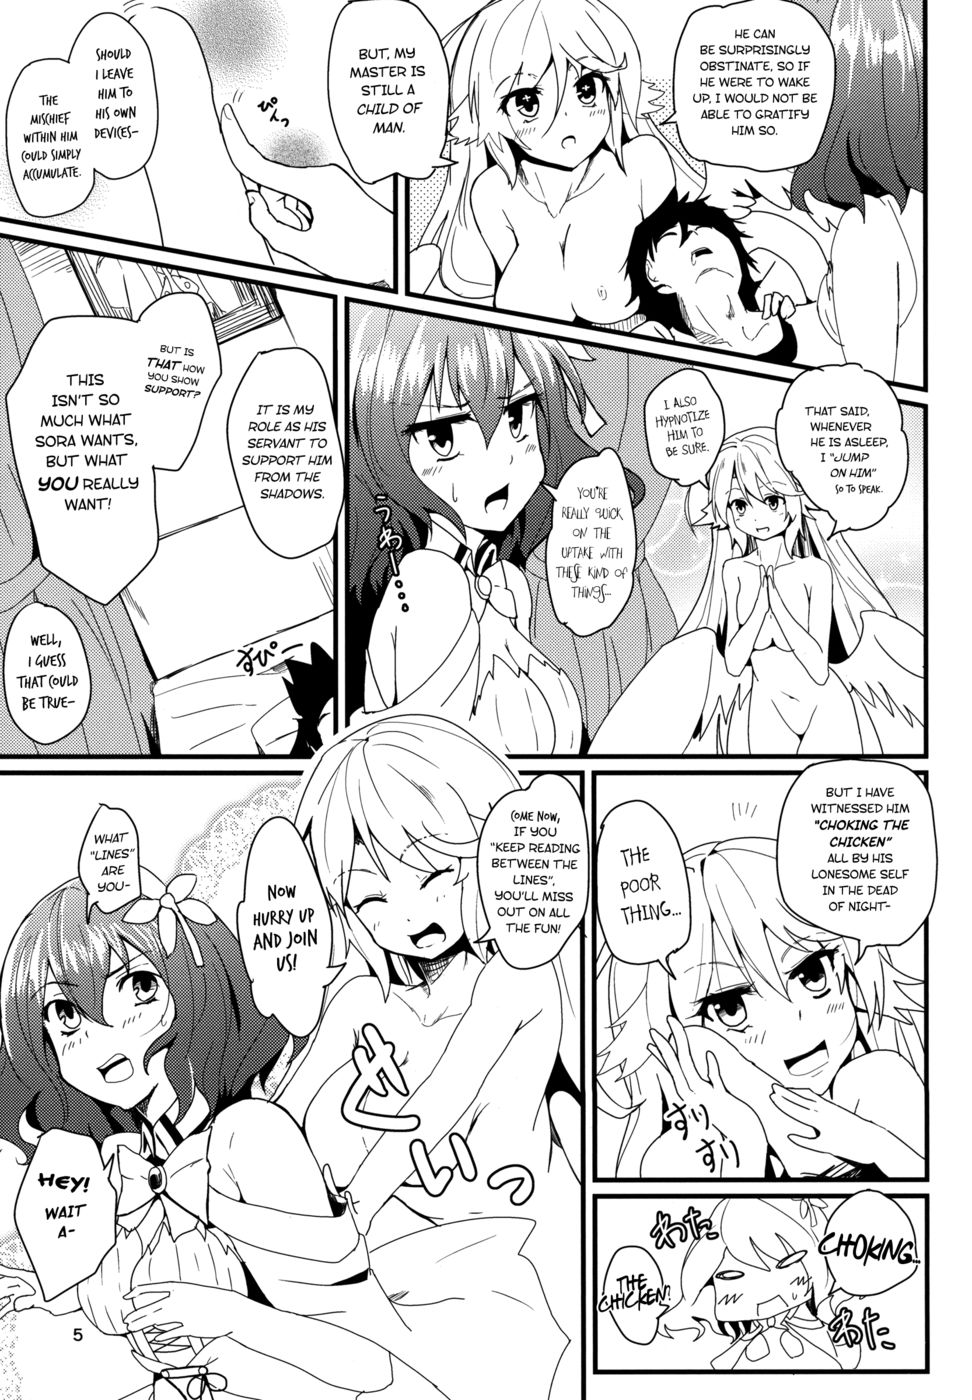 Hentai Manga Comic-Jibril and Steph's Attempt at Service!-Read-5